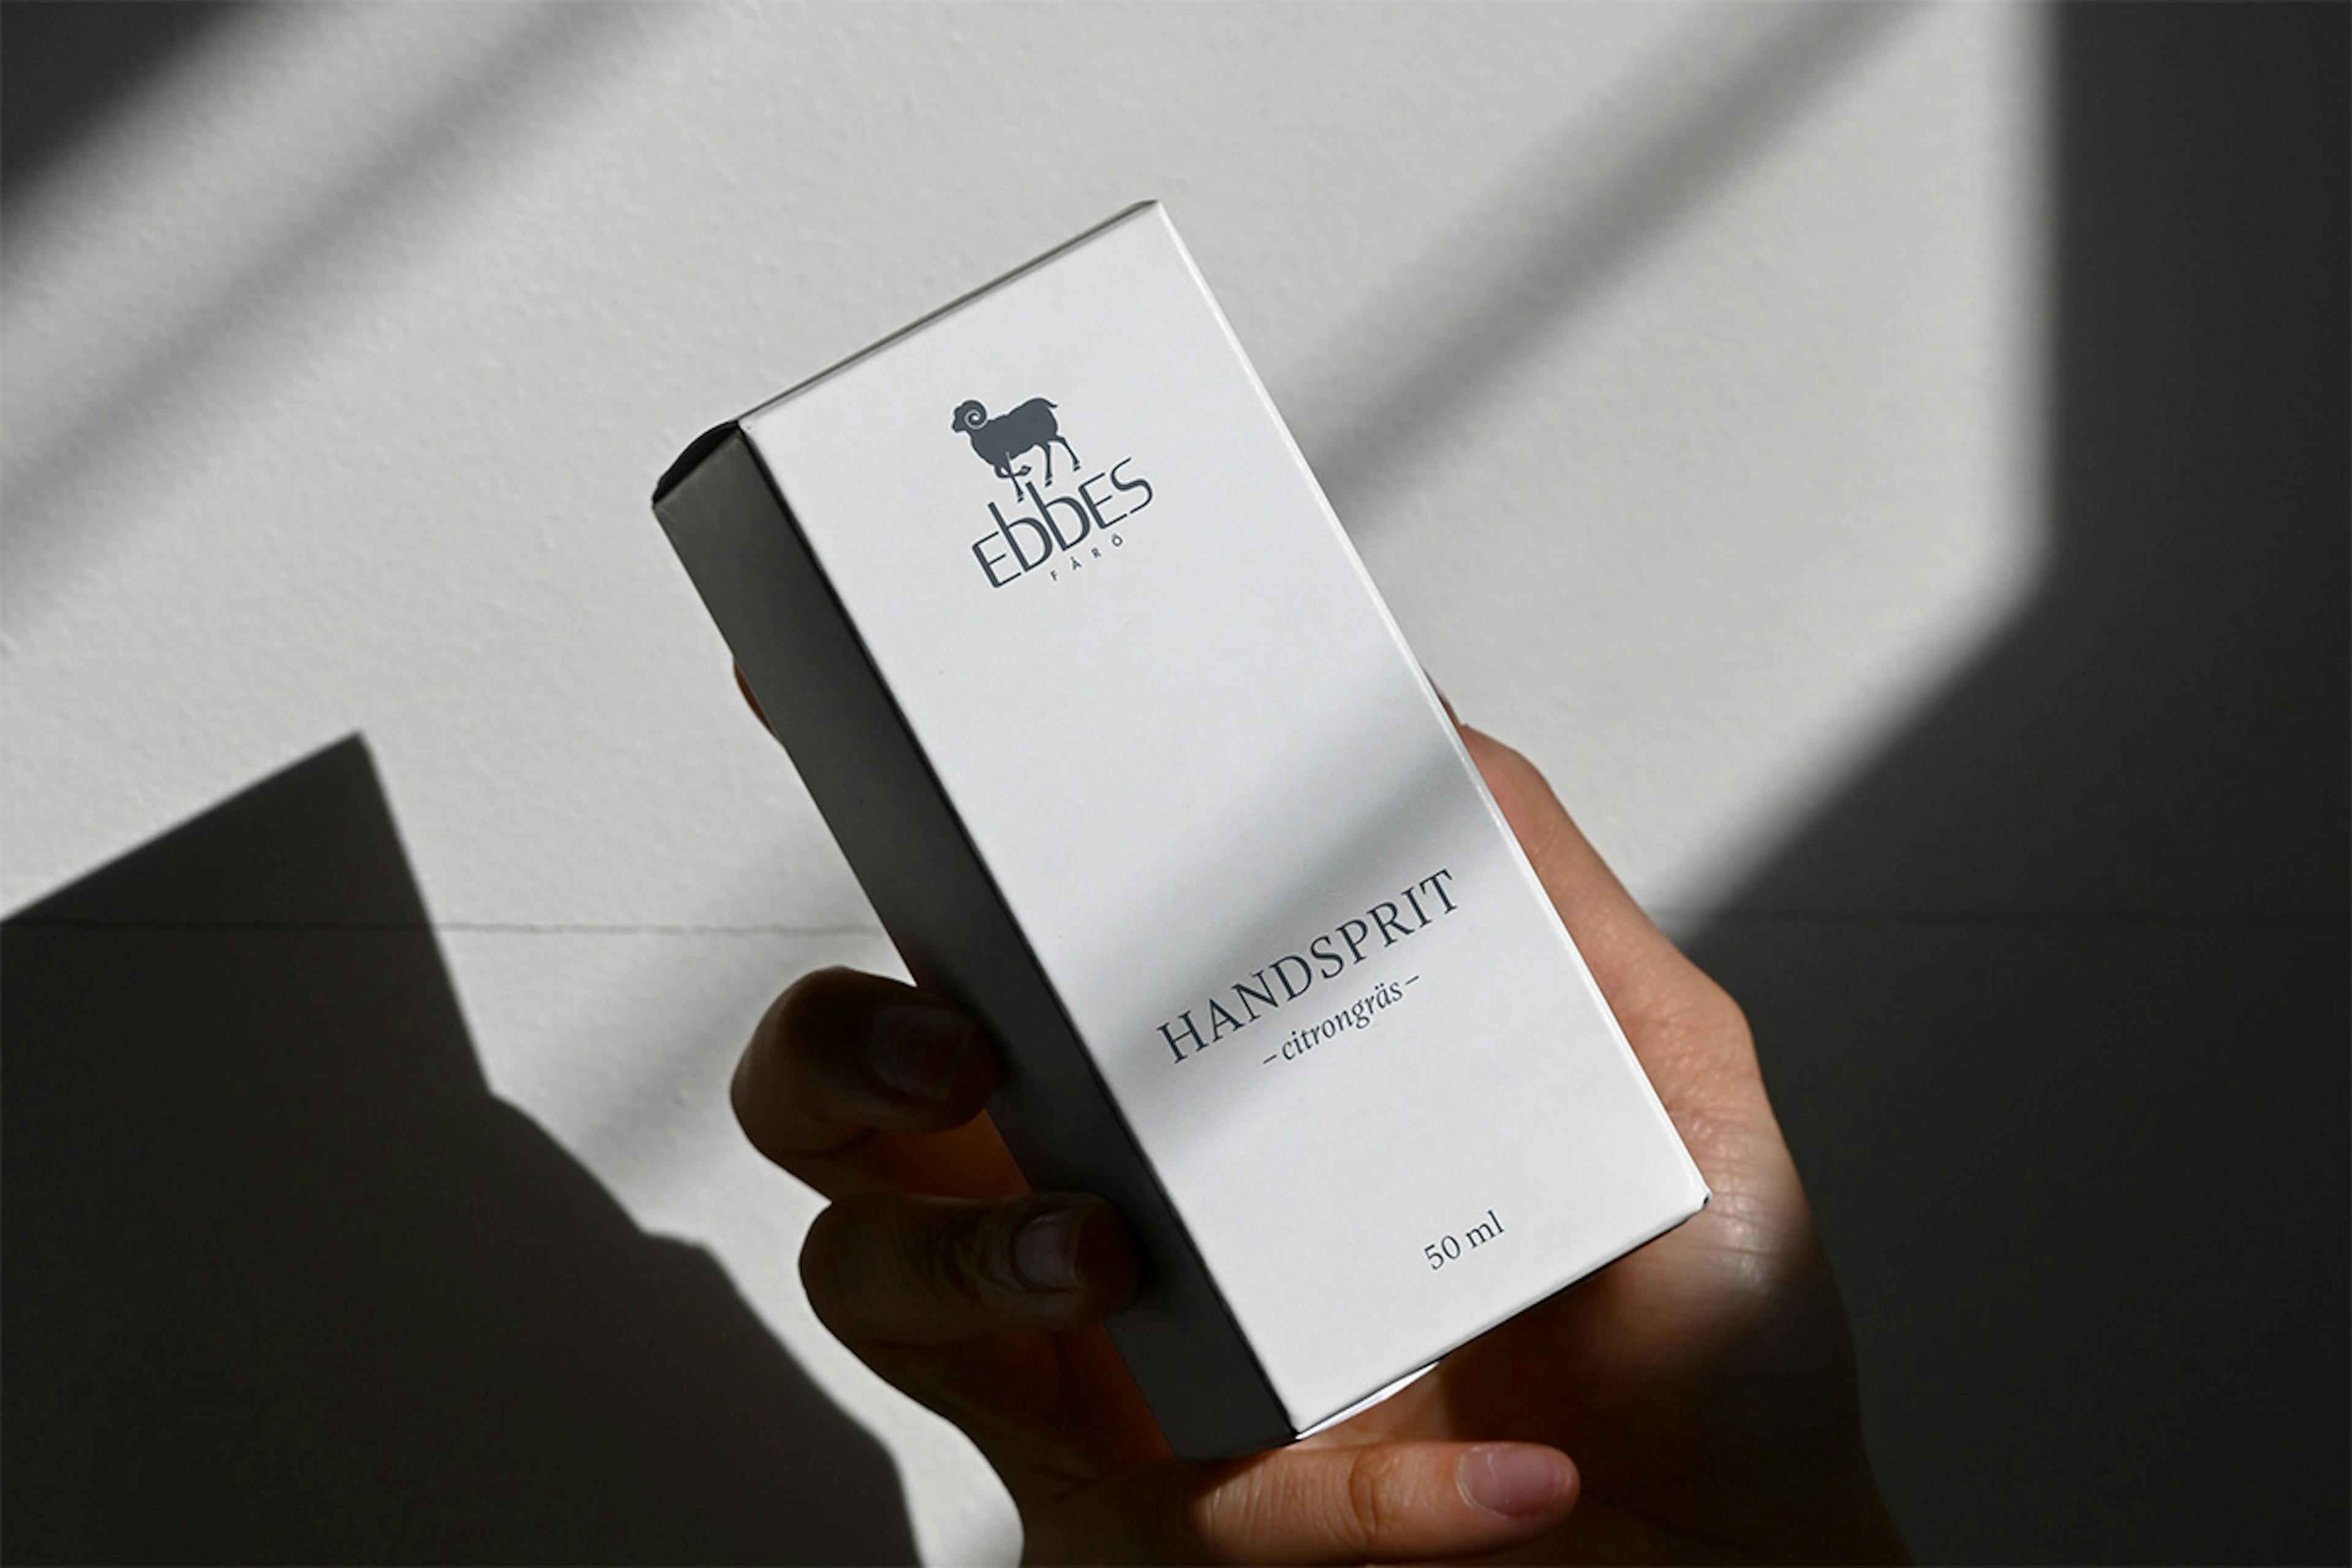 A white box with Ebbes's logotype placed on the front